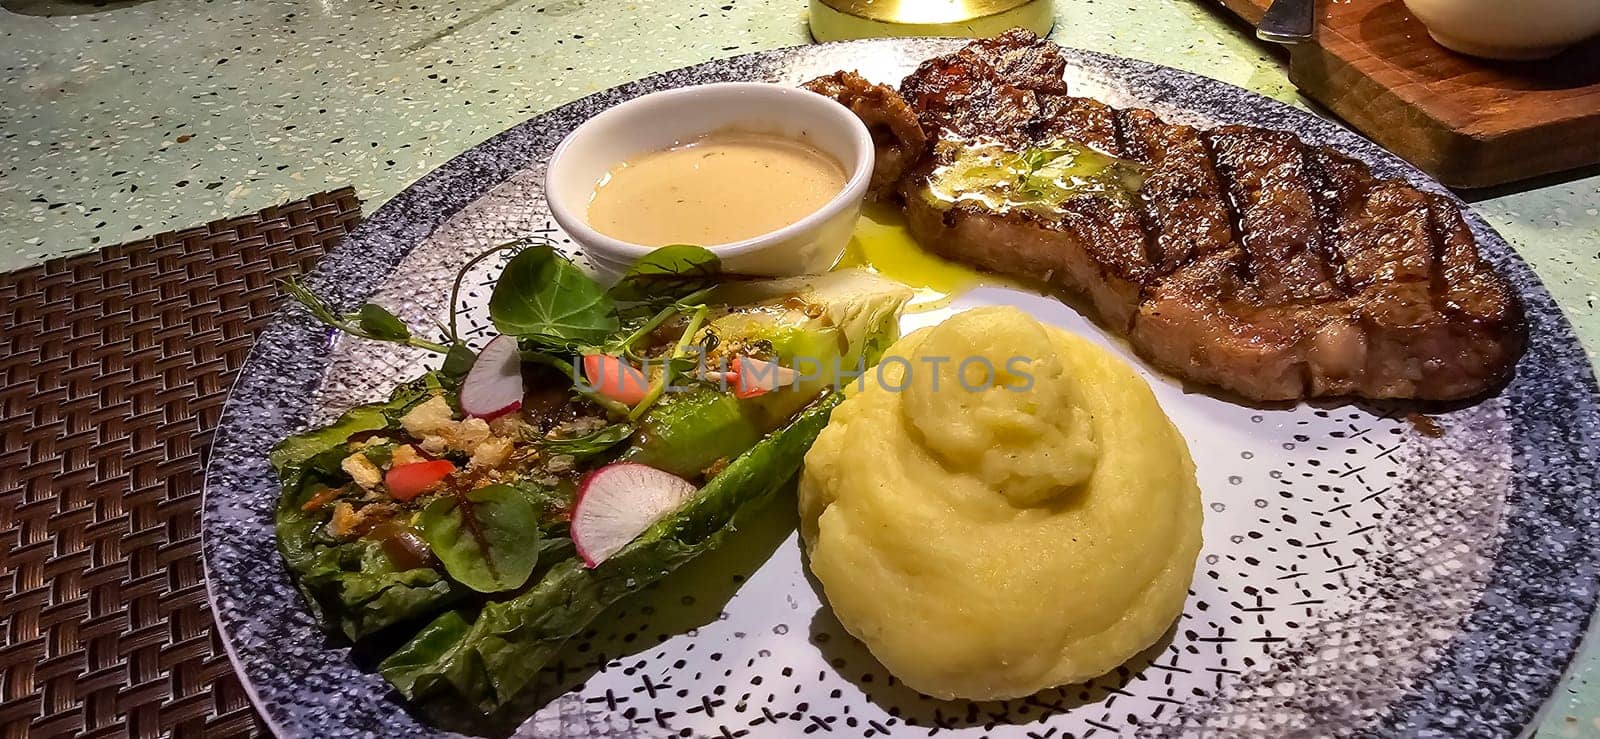 Beef New York strip loin steak or sirloin steak served with potatoes, and mushroom sauce and salad on plate Marble premium beef